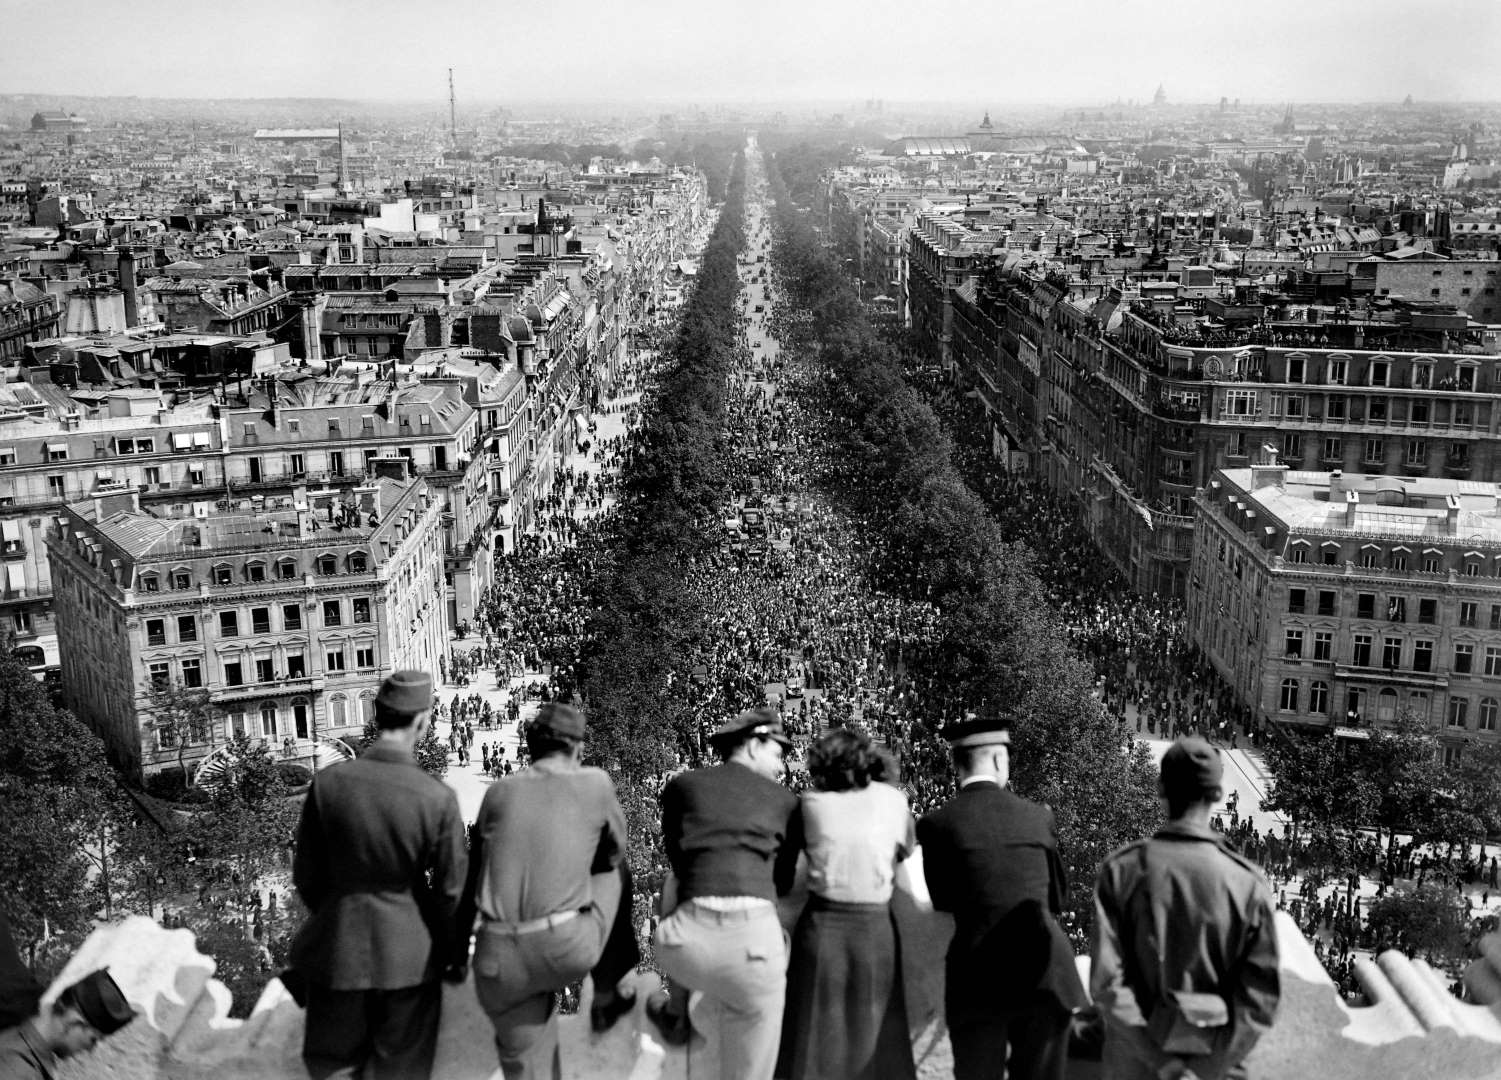 United States Army personnel on top of l’Arc de Triomphe in Paris, France watching the celebration in the streets over the war in Europe coming to an end, 8 May 1945.